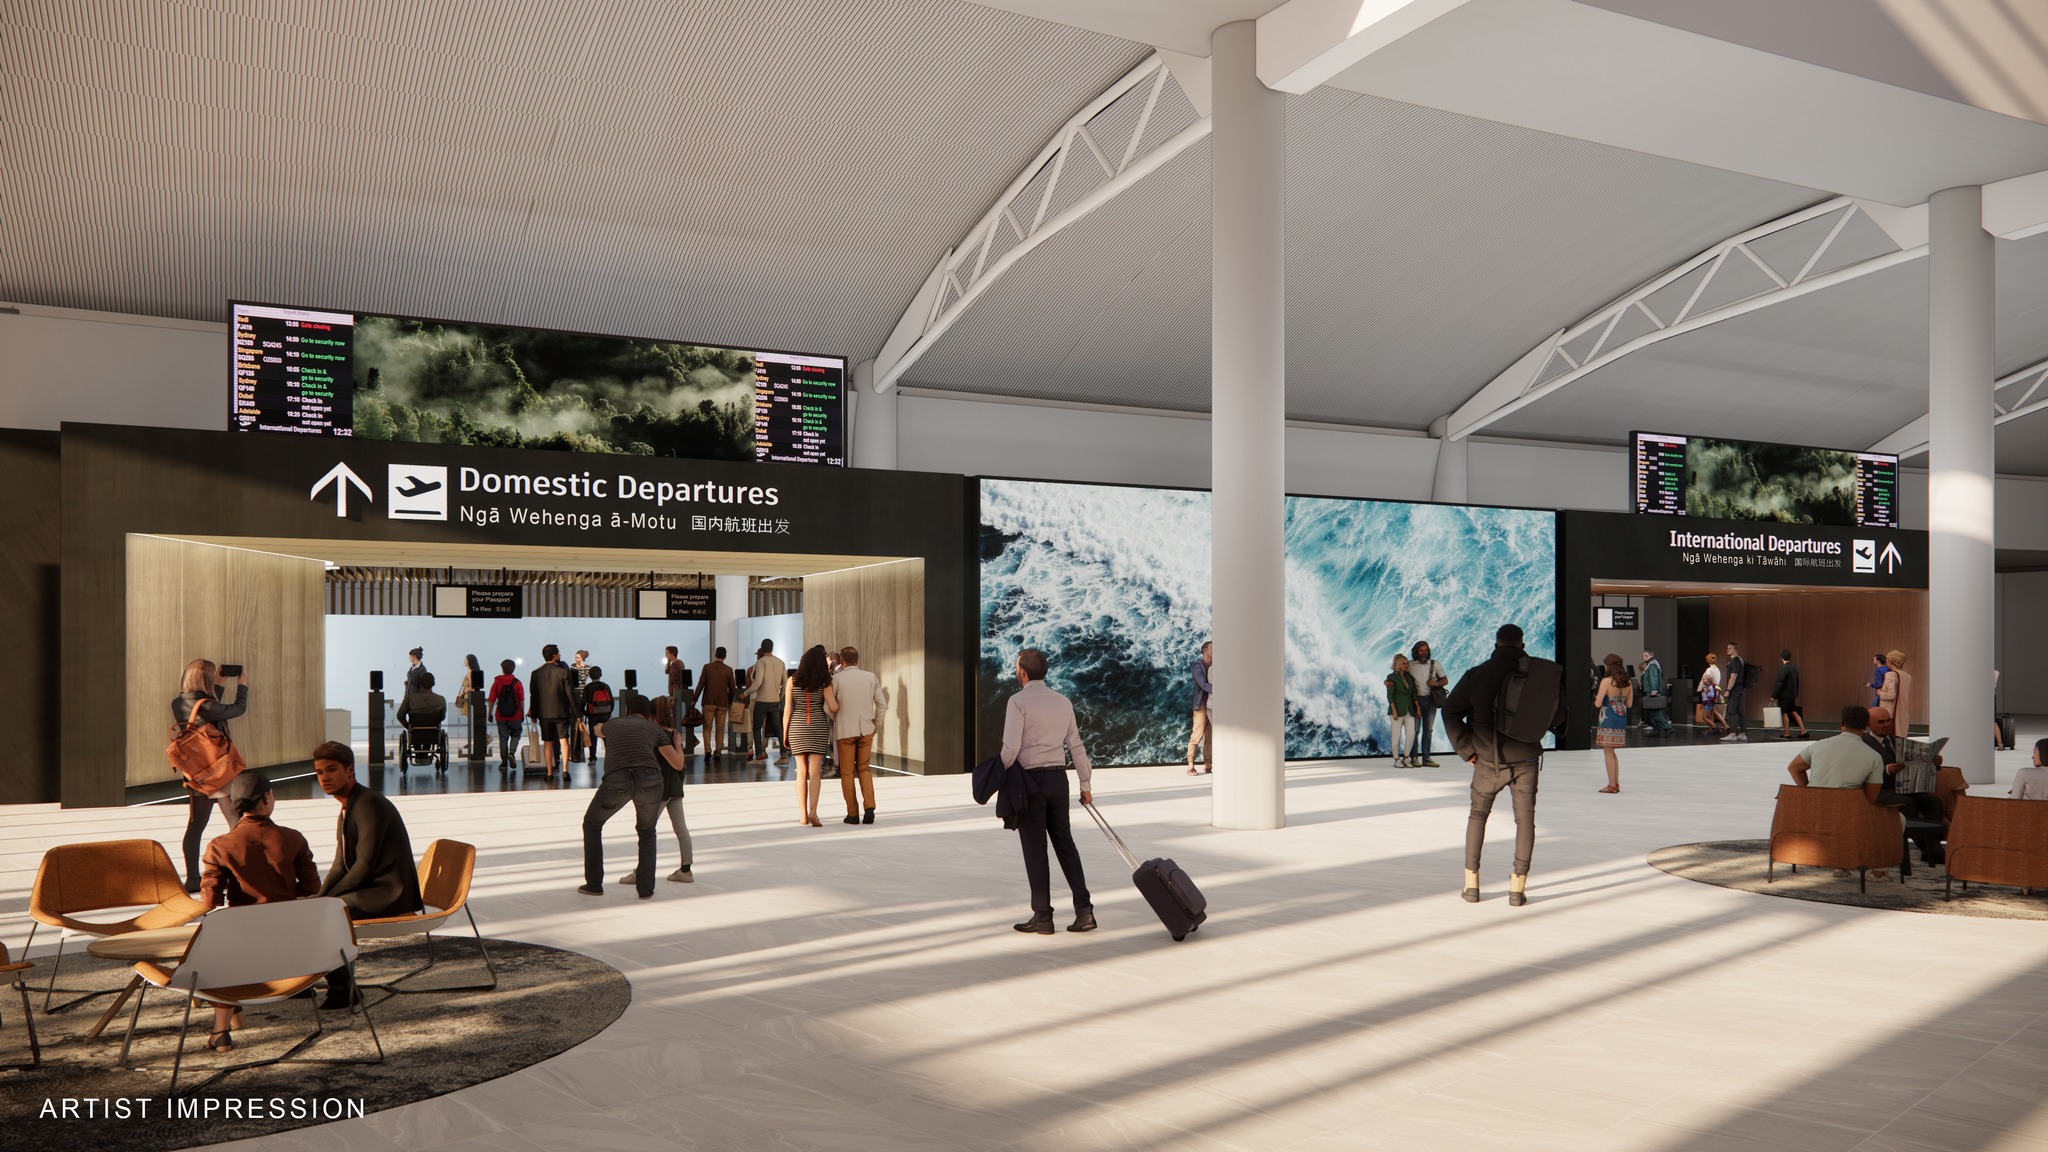 An interior rendering of the new terminal